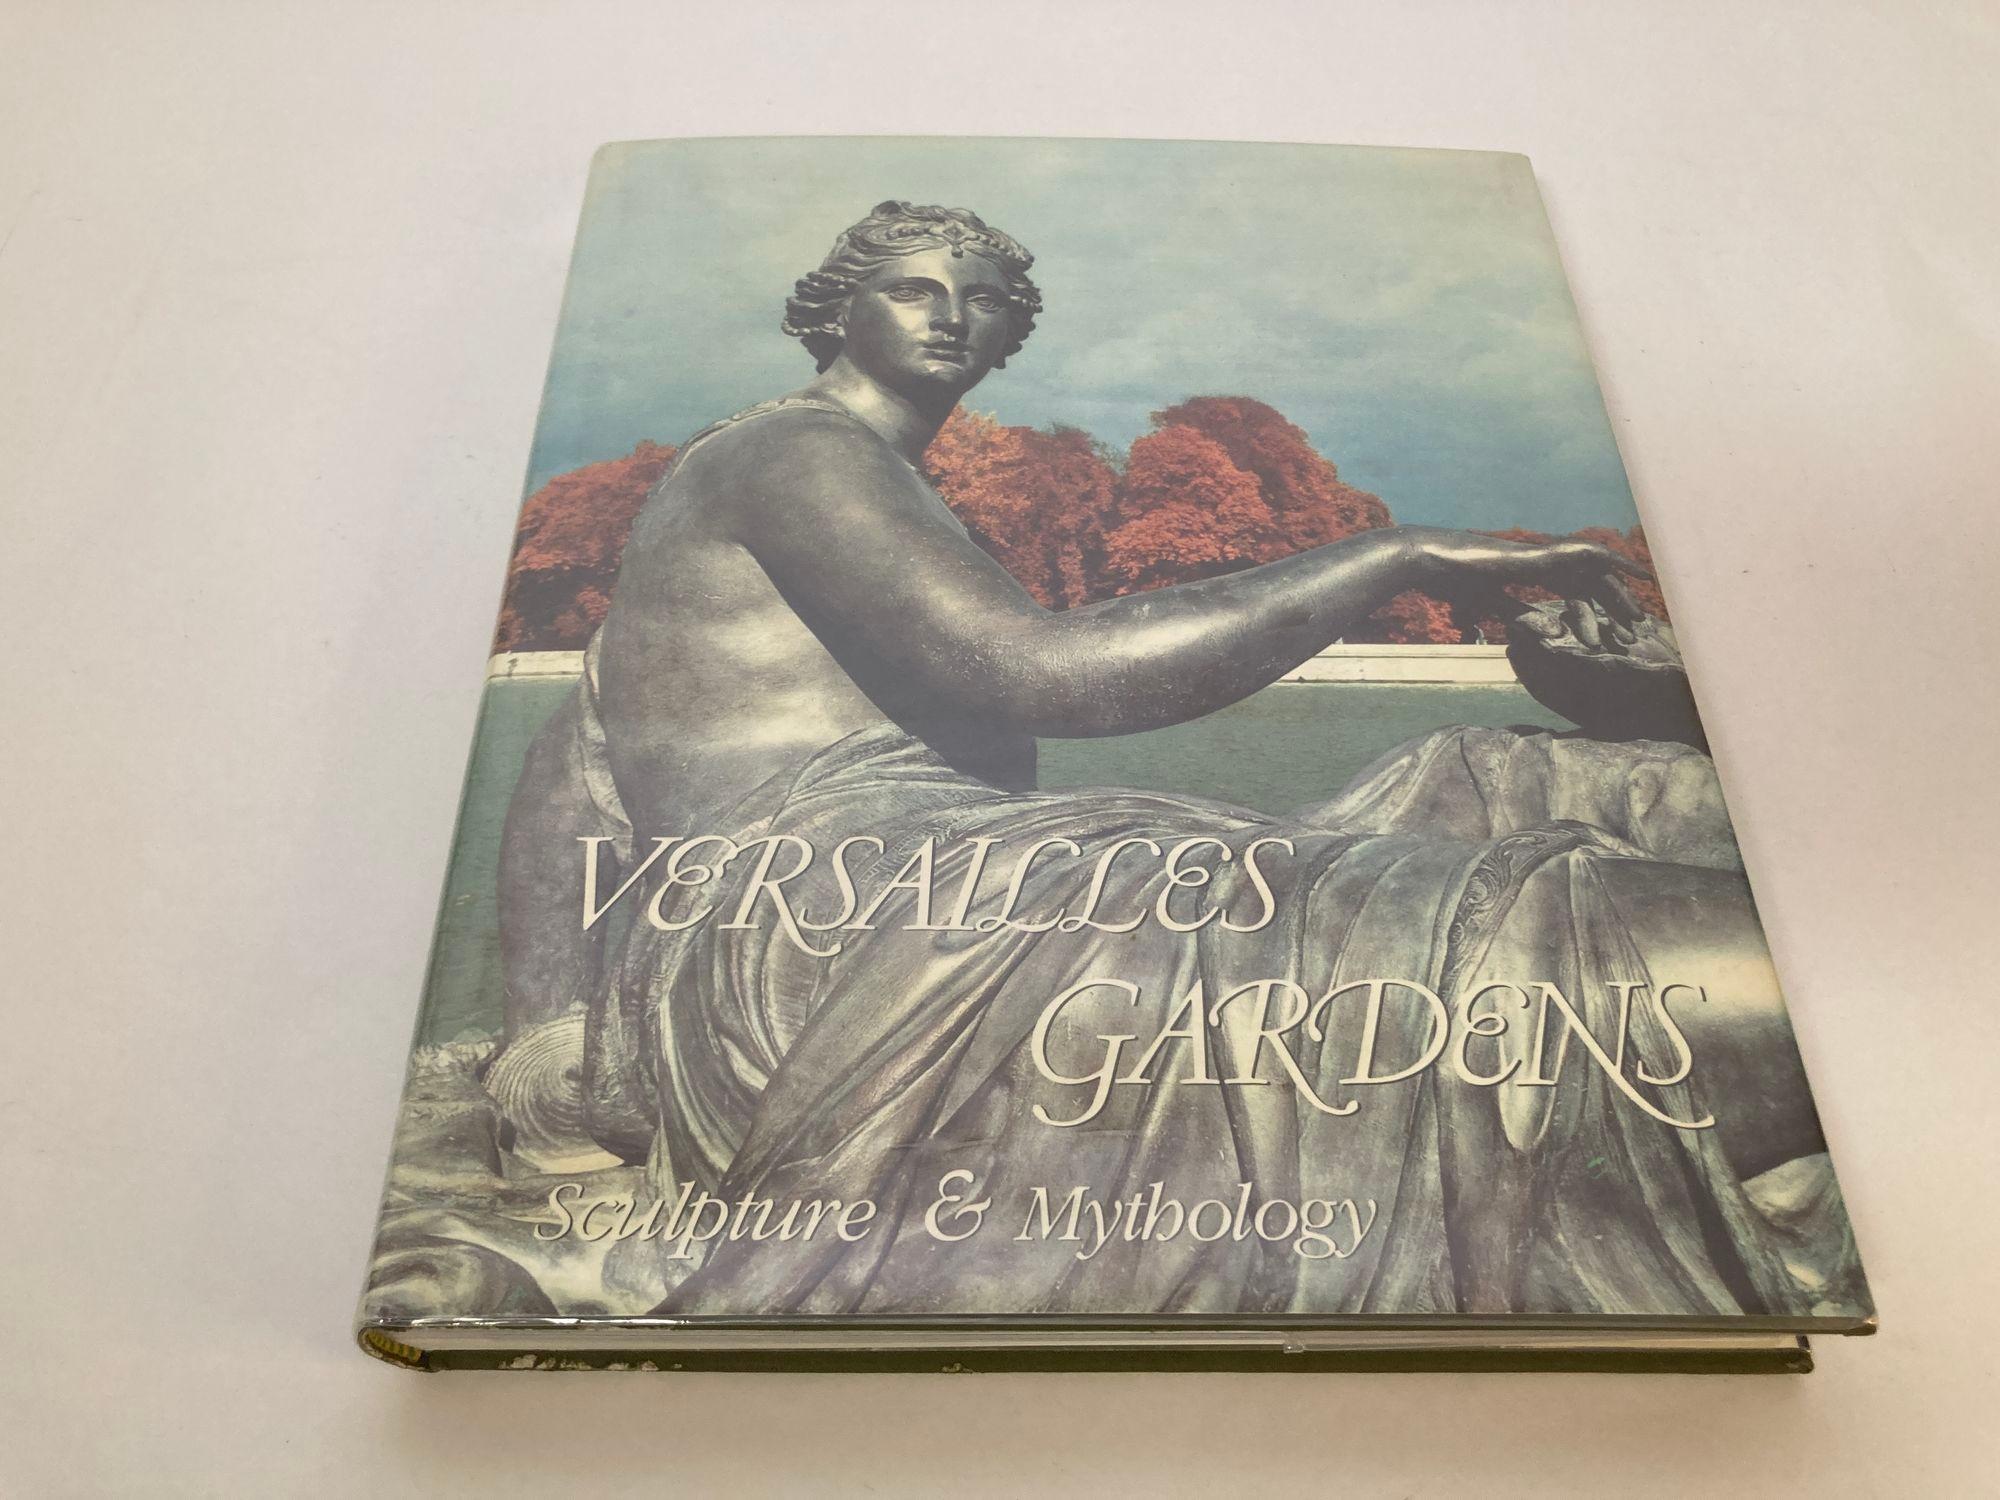 Versailles Gardens Sculpture And Mythology By Jacques Girard 1985.
Discover the artistic splendor of the gardens of Versailles with the book 